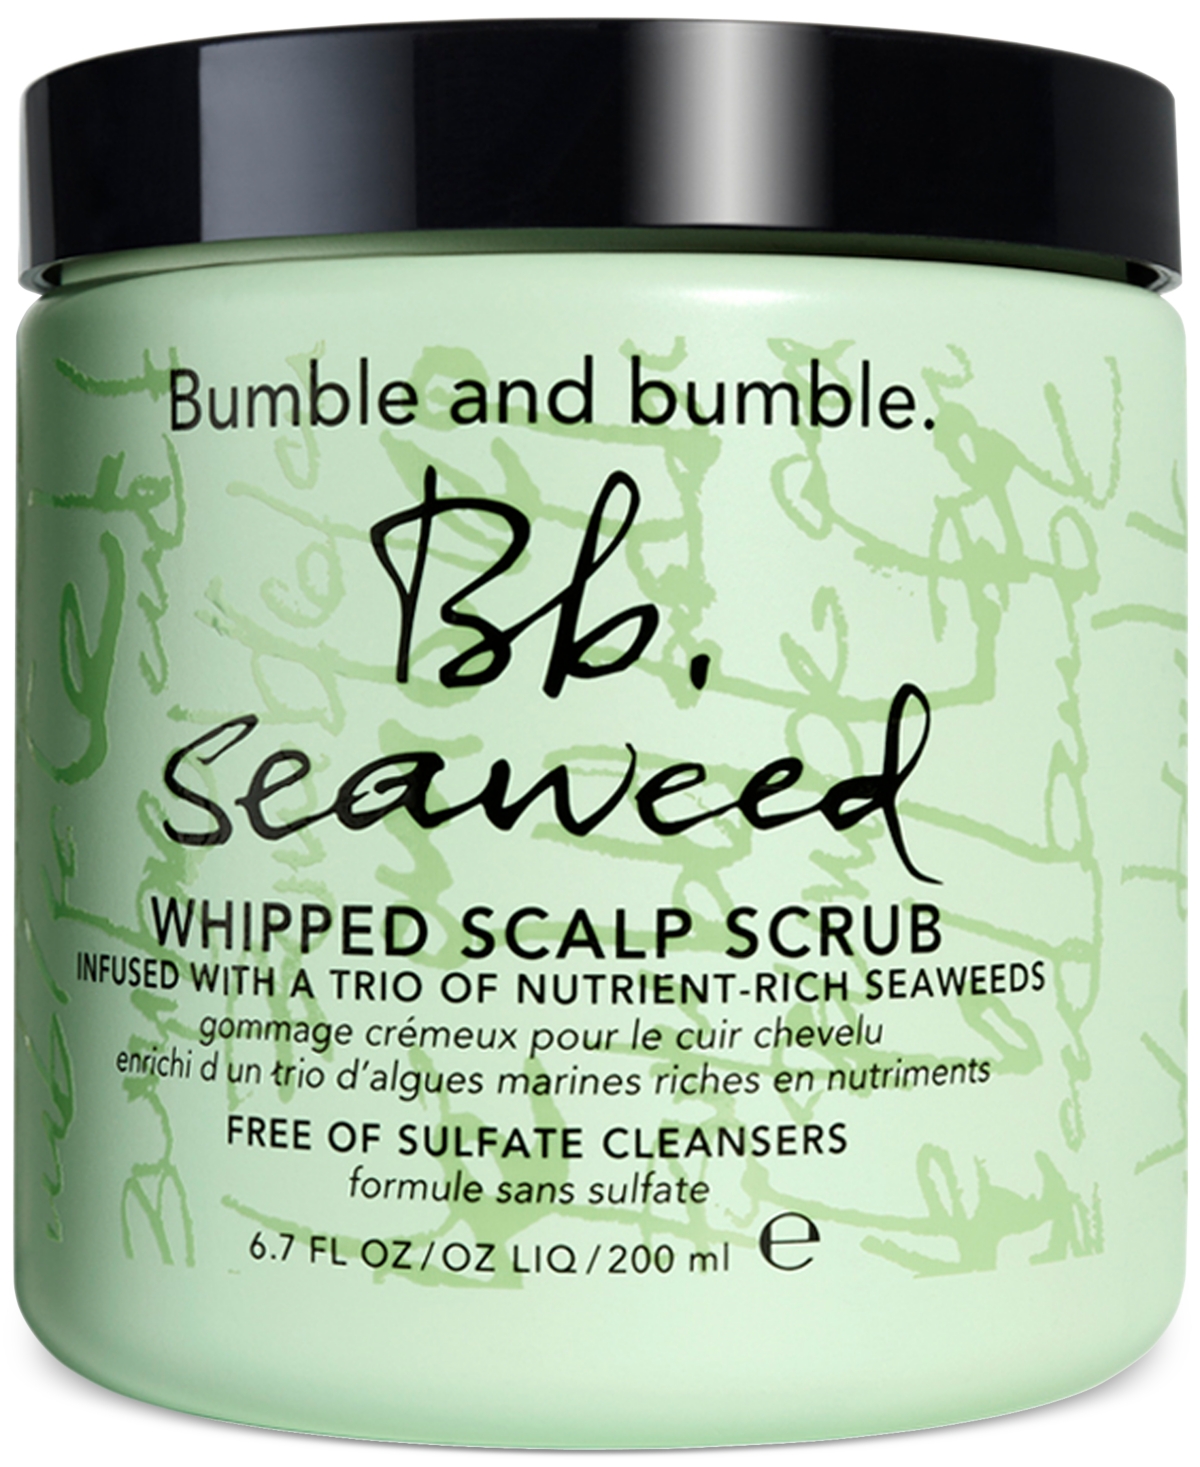 UPC 685428000452 product image for Bumble and Bumble Seaweed Whipped Scalp Scrub, 6.7 oz. | upcitemdb.com